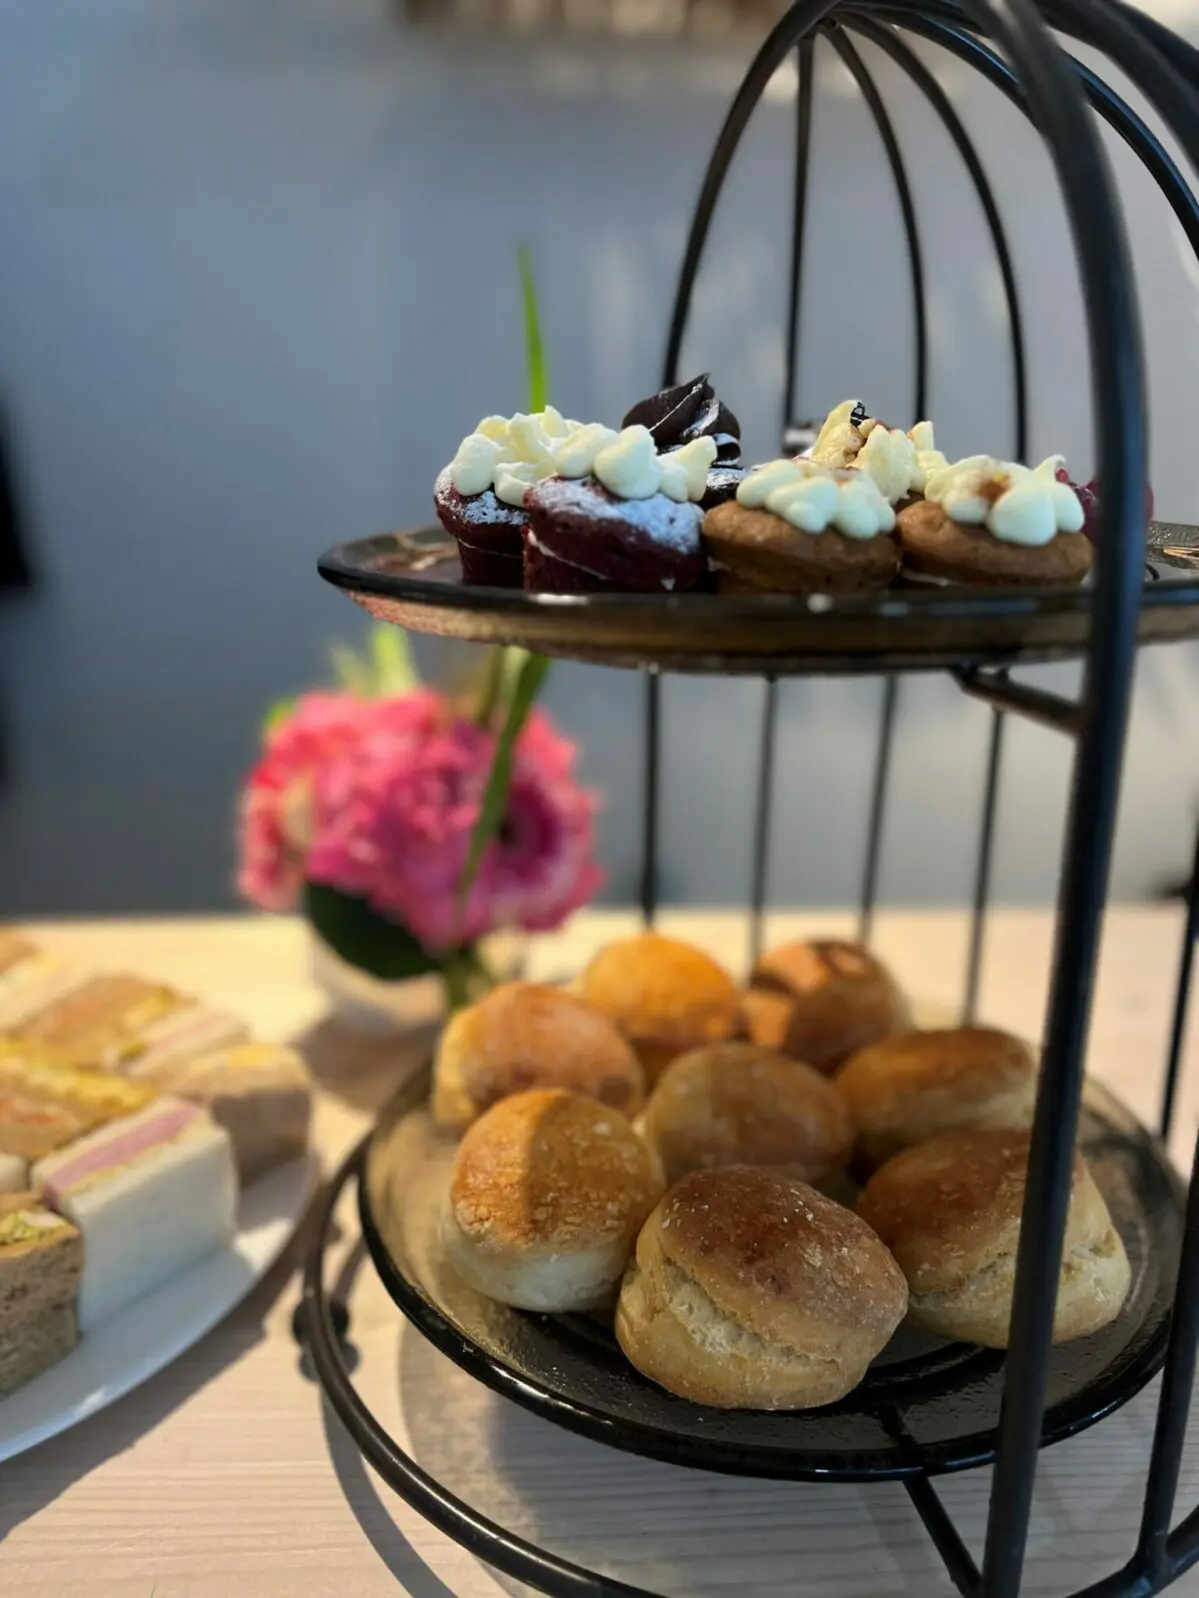 Afternoon tea served at Ascot